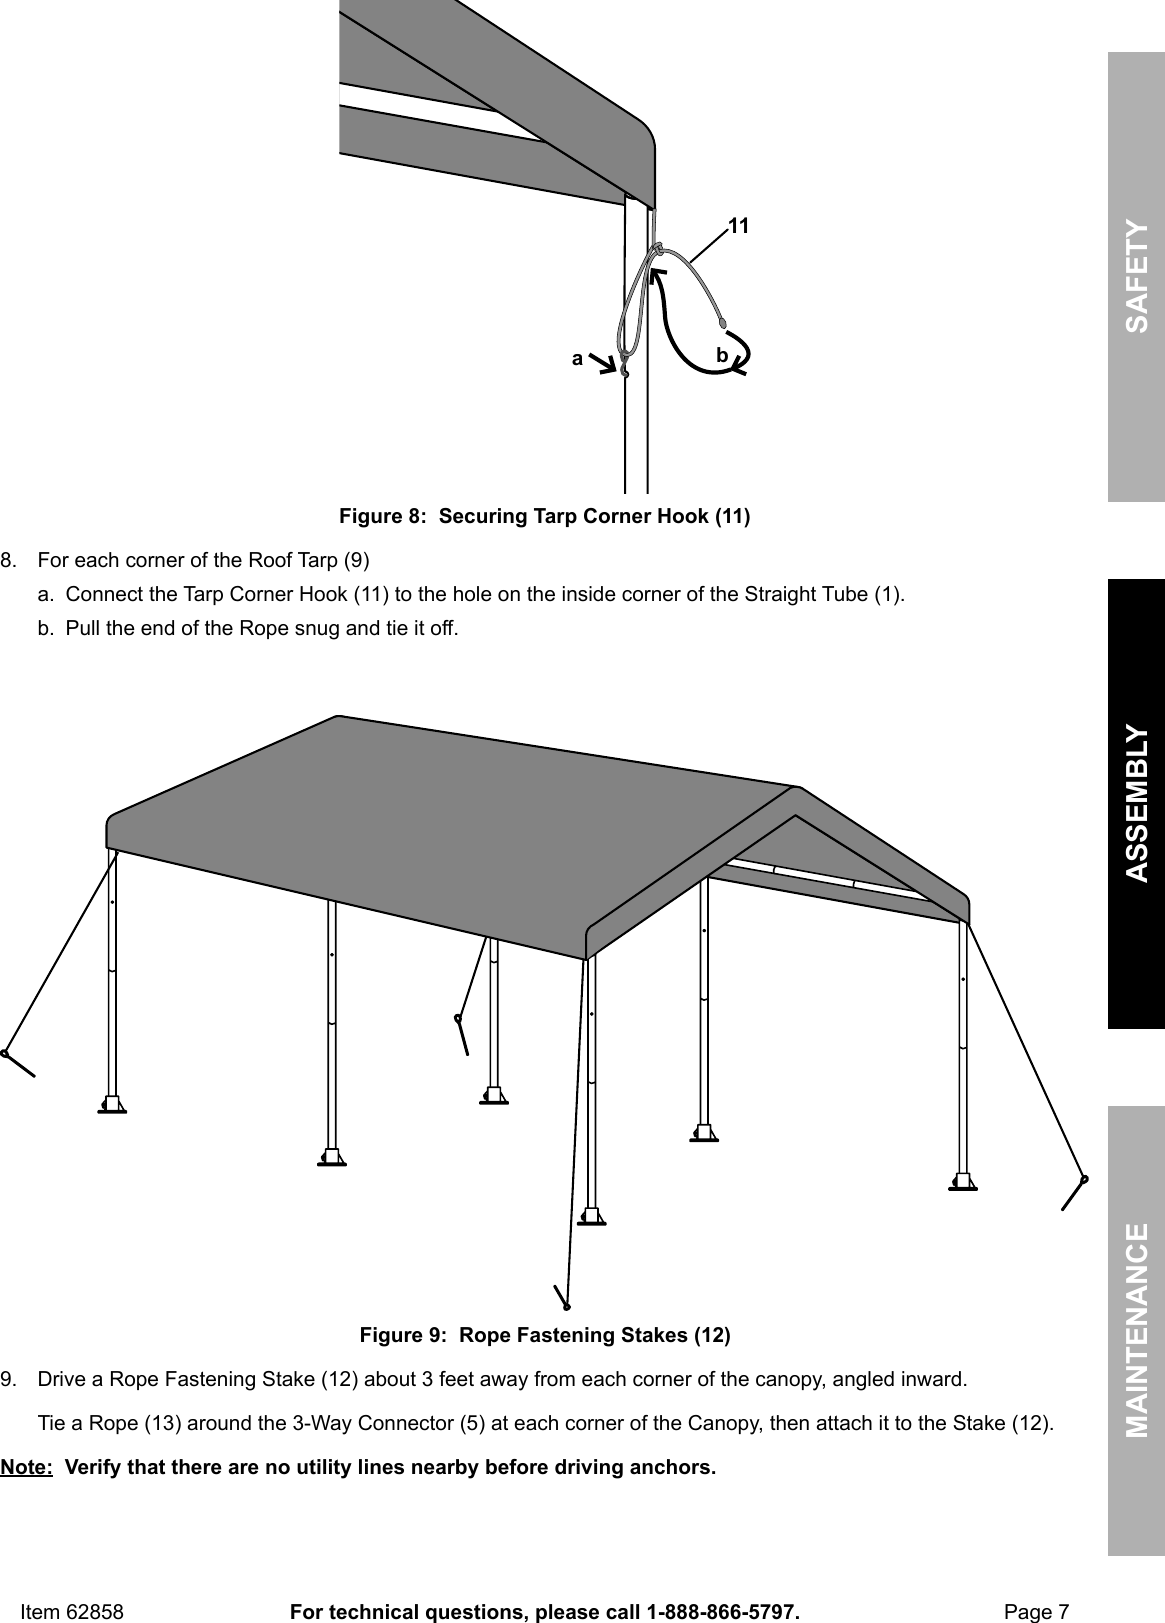 Page 7 of 12 - Manual For The 62858 10 Ft. X 20 Portable Car Canopy